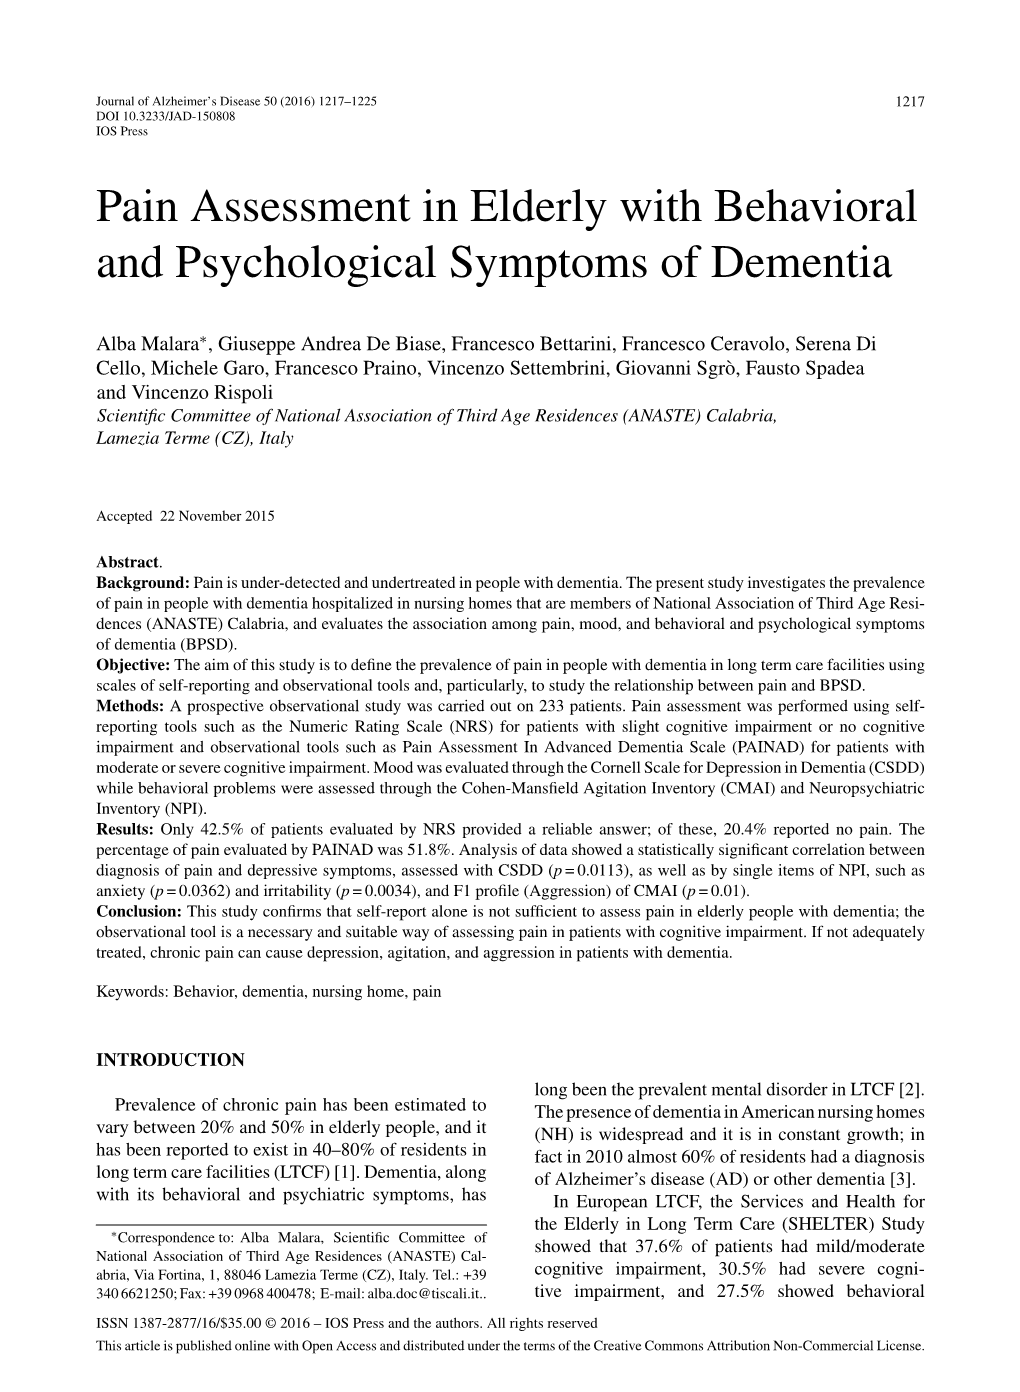 Pain Assessment in Elderly with Behavioral and Psychological Symptoms of Dementia